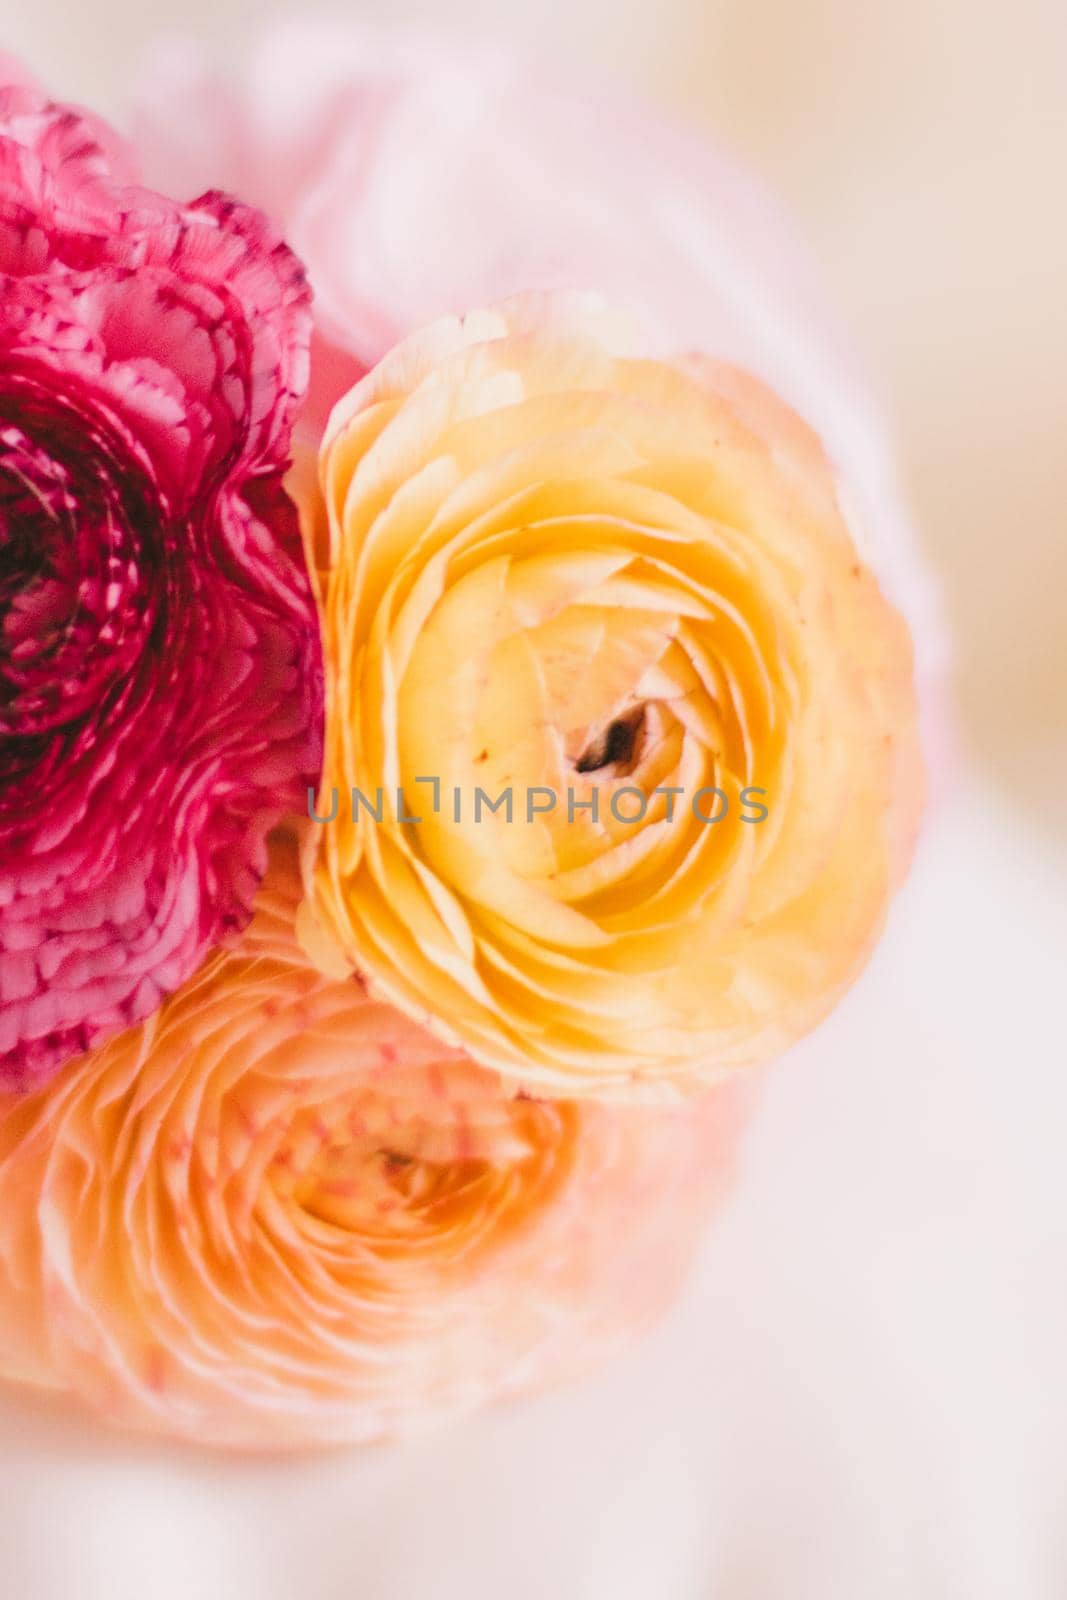 rose flowers bridal bouquet - wedding, holiday and floral garden styled concept, elegant visuals